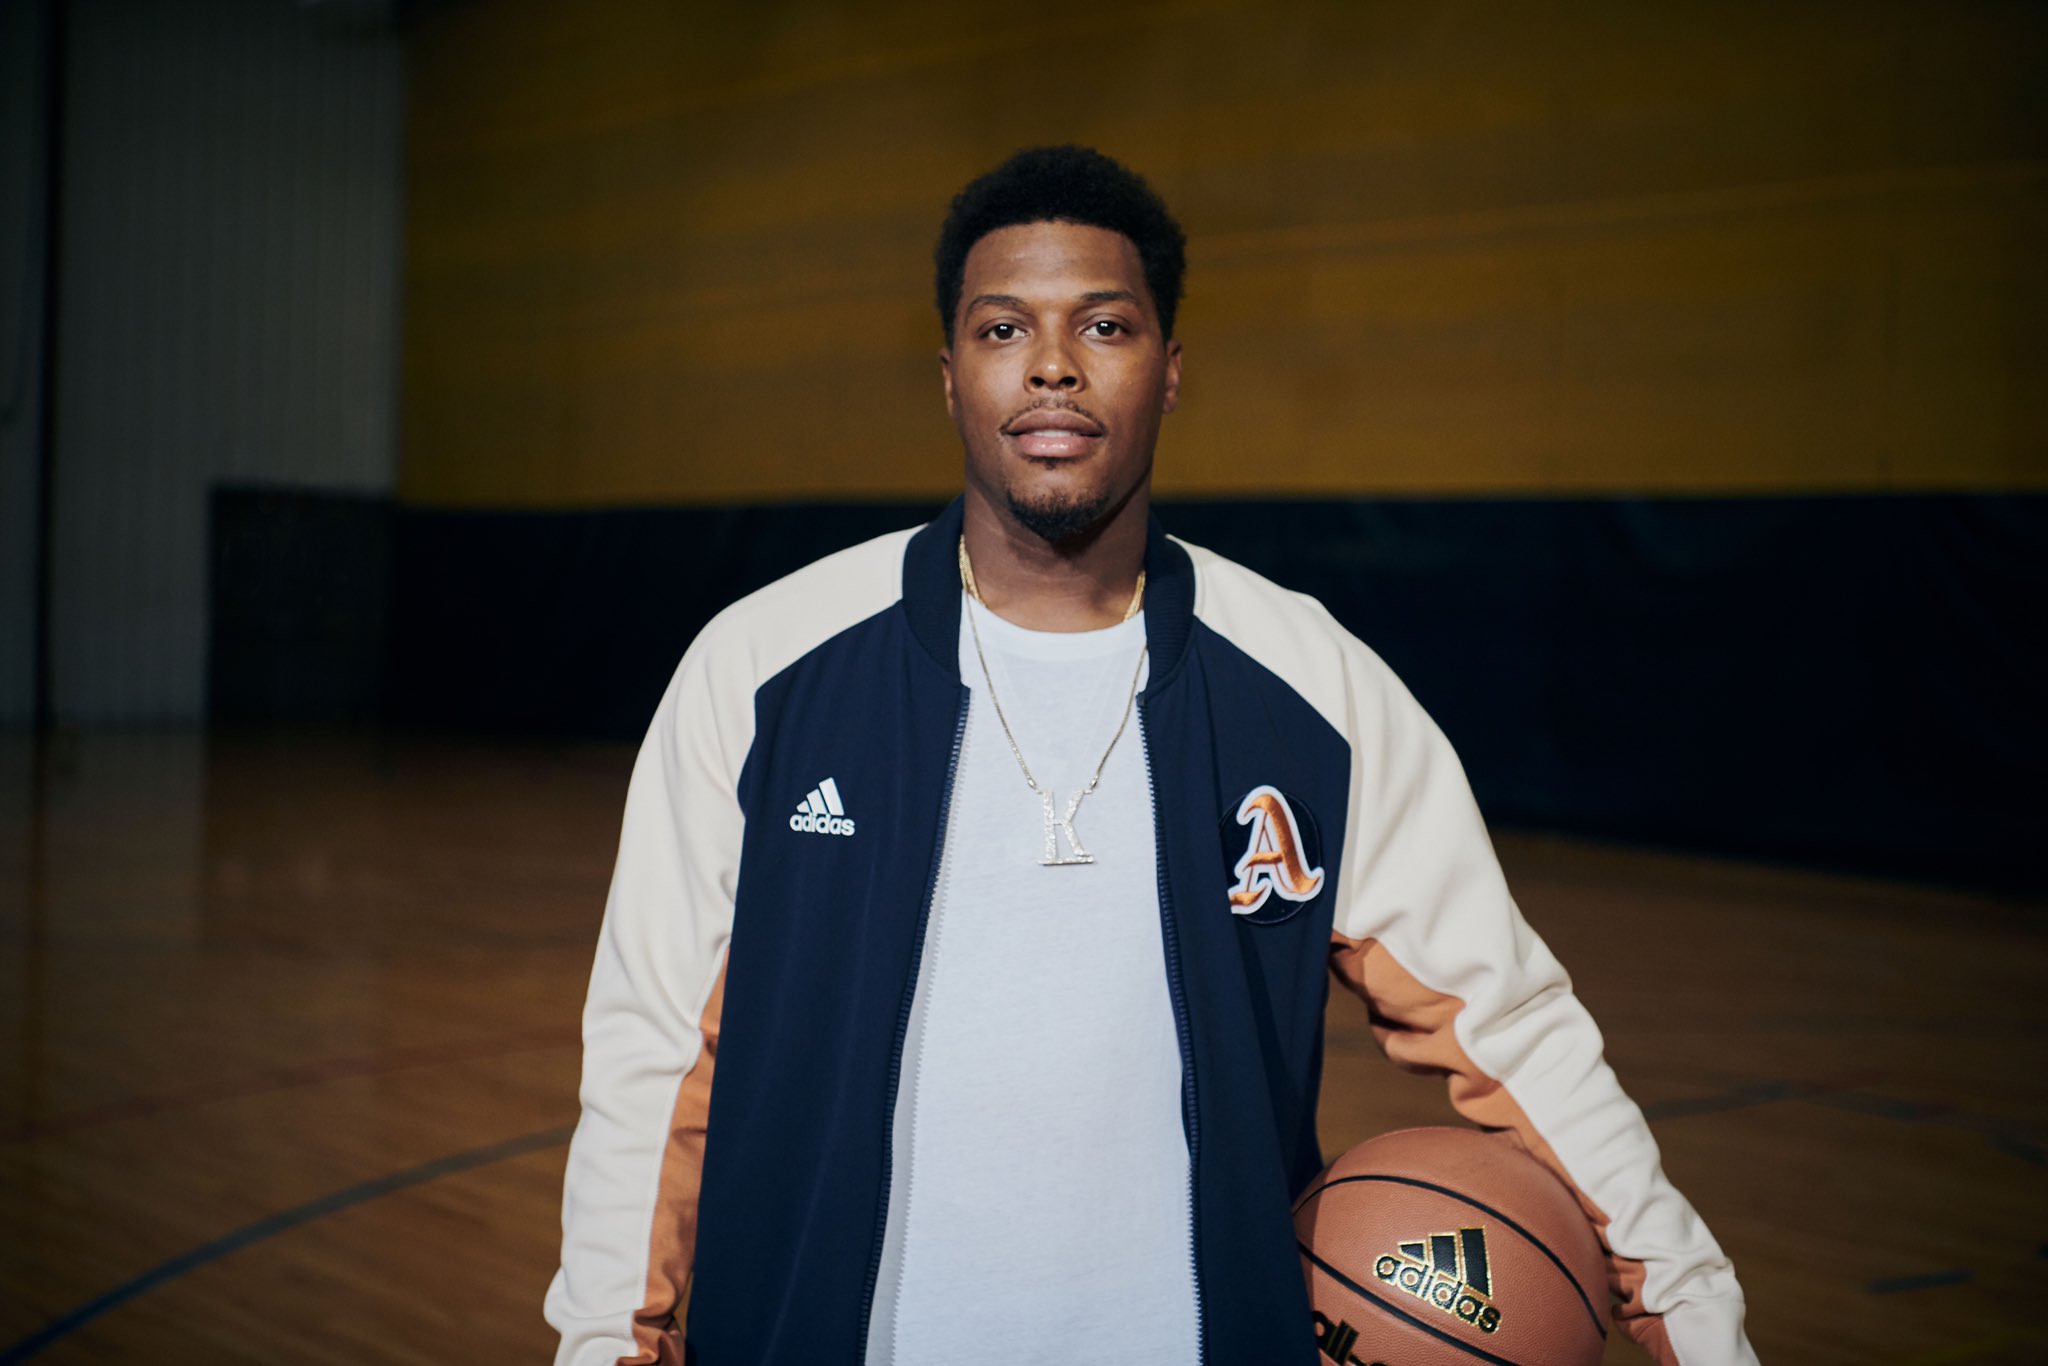 Kyle Lowry on Twitter: "Representing team @adidasca in the new VRCT Jacket.  Inspired by sports heritage and reinvented into a staple piece, get the  VRCT Jacket at https://t.co/dSVQ4d3waG #WeRepresent #createdwithadidas  https://t.co/gdYJ4T5j1a" /